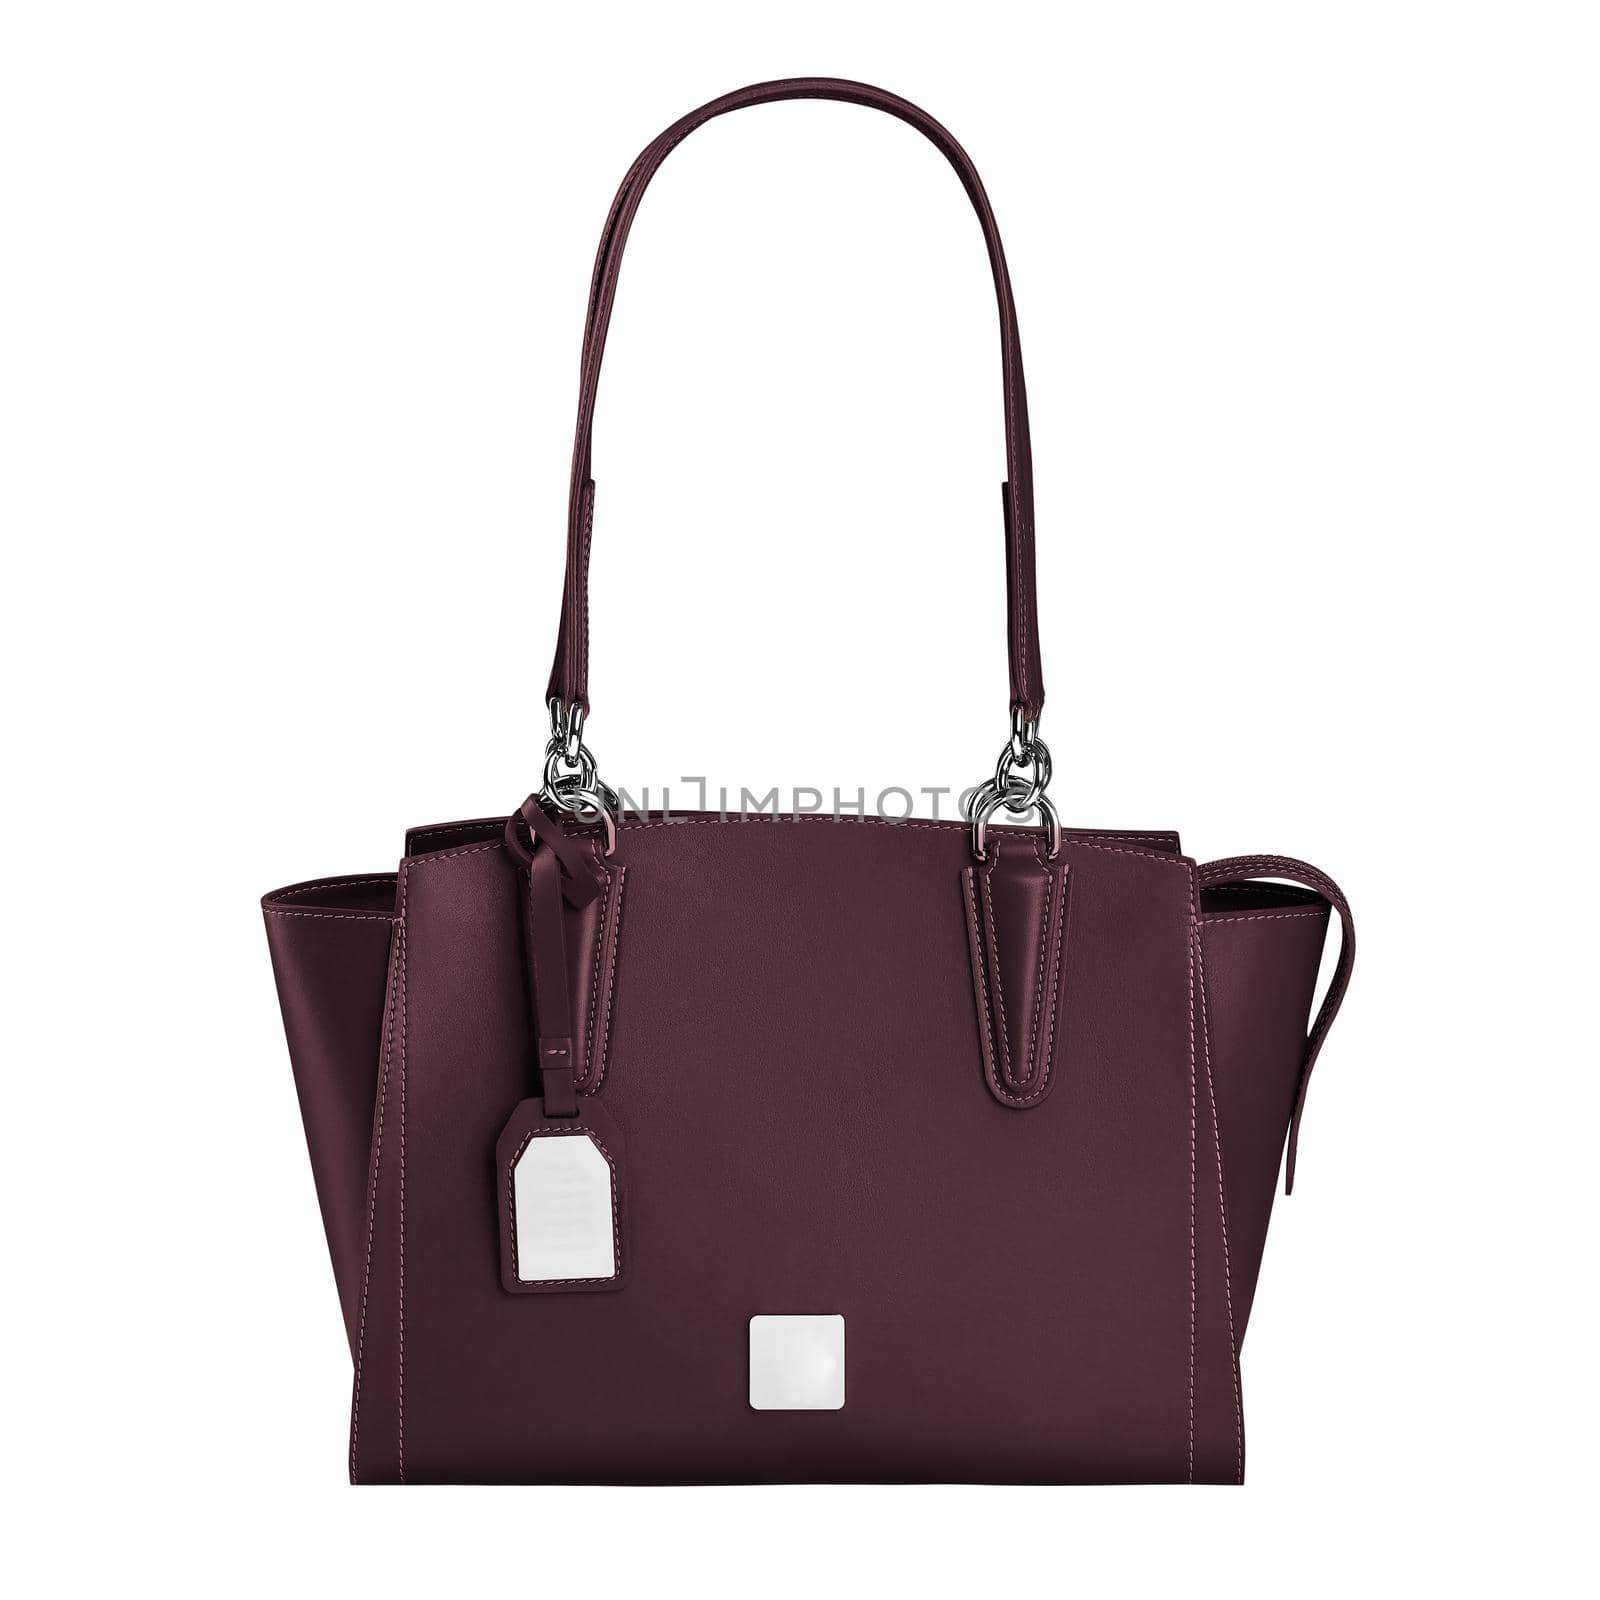 Comfortable dark maroon medium sized handbag made of genuine leather with two handles and blank labels isolated on white background. Women accessories concept